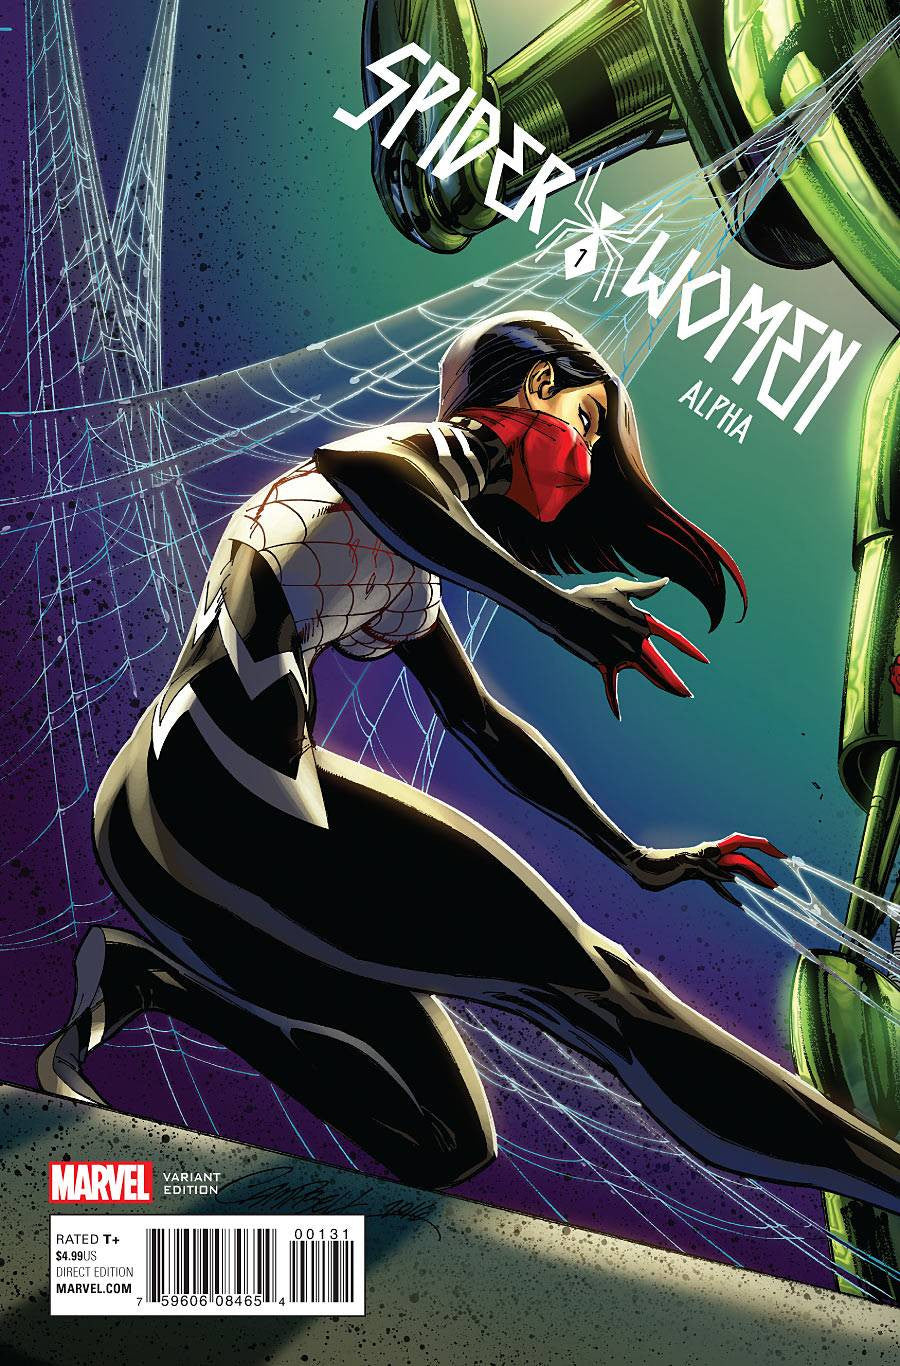 SPIDER-WOMEN ALPHA #1 CAMPBELL CONNECTING A VAR SWO COVER